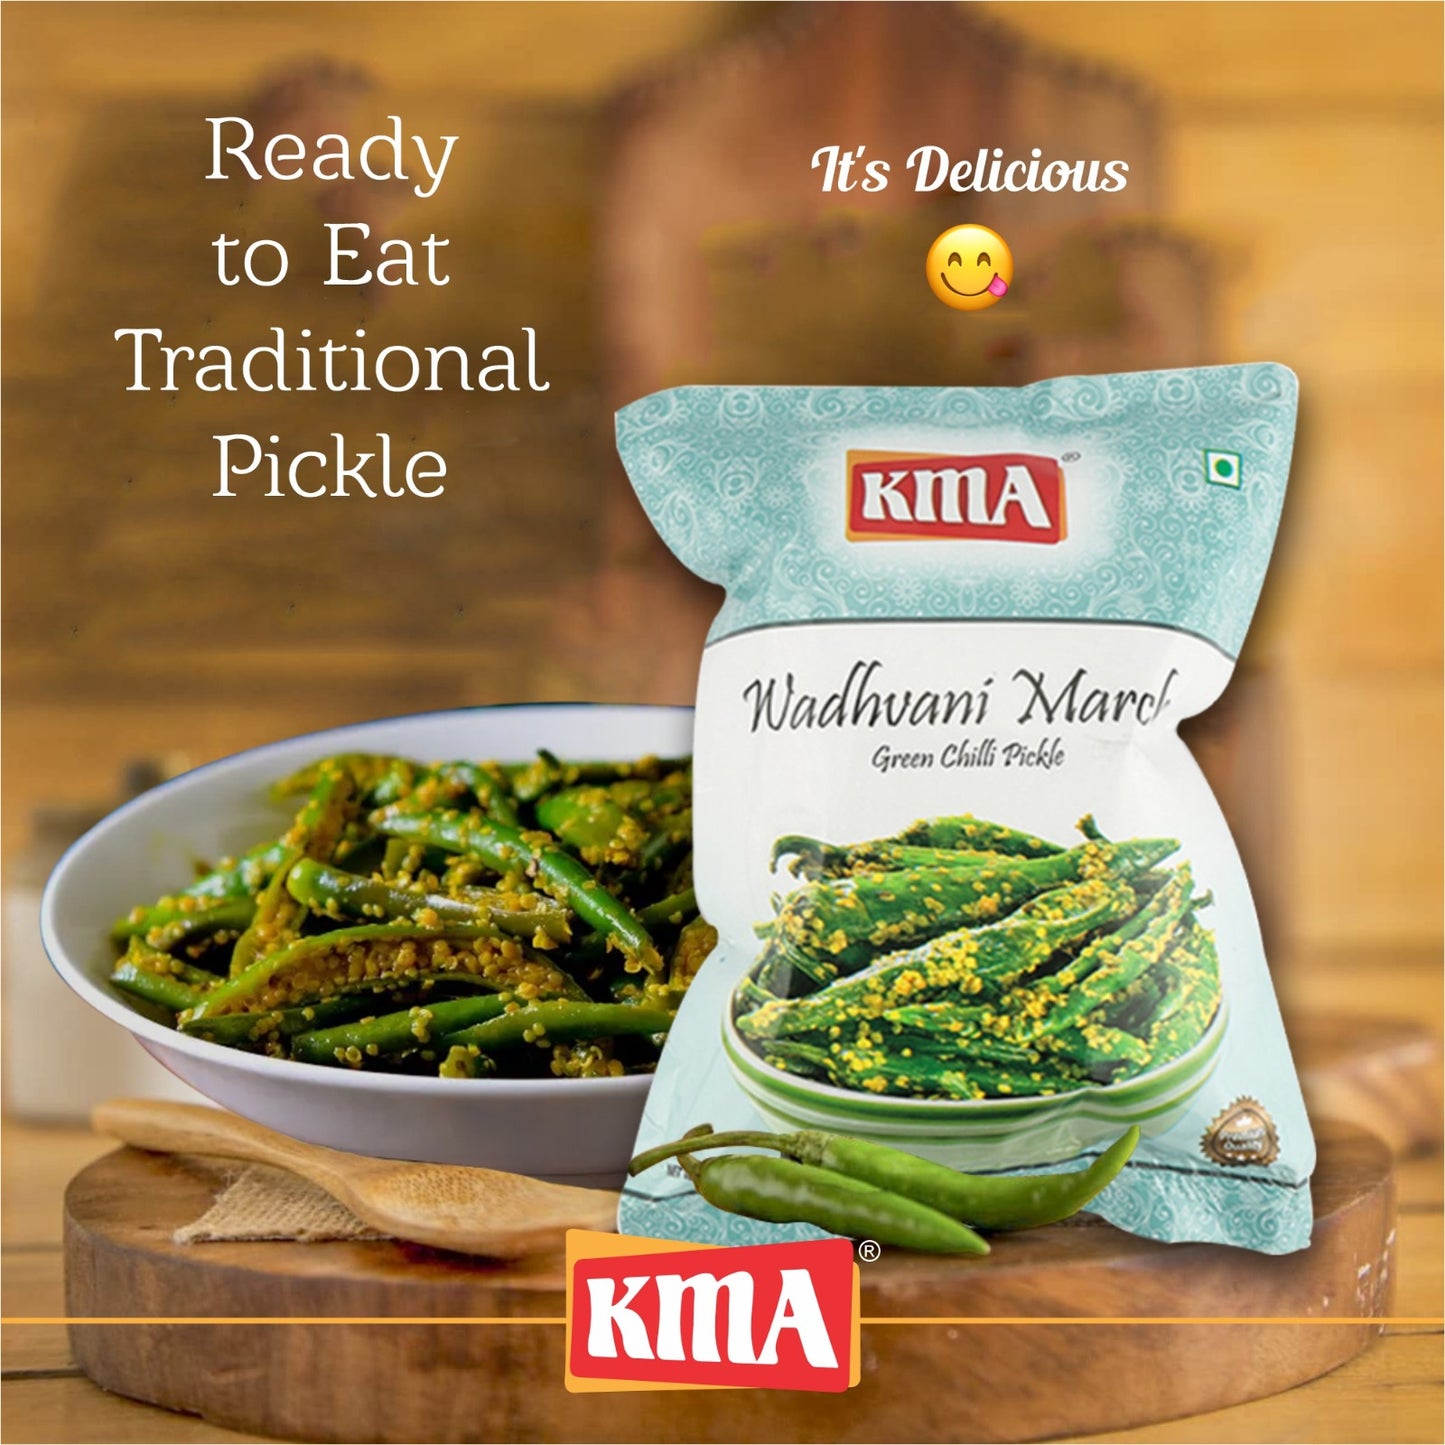 KMA Green Chilli Pickle | Homemade Hari Mirch Ka Achar | Wadhwani Marcha | 600 g | Pack of 3 x 200g | Green Chilli Dry Pickle Pouch | Ready to Eat | No Preservatives, No Colors Added